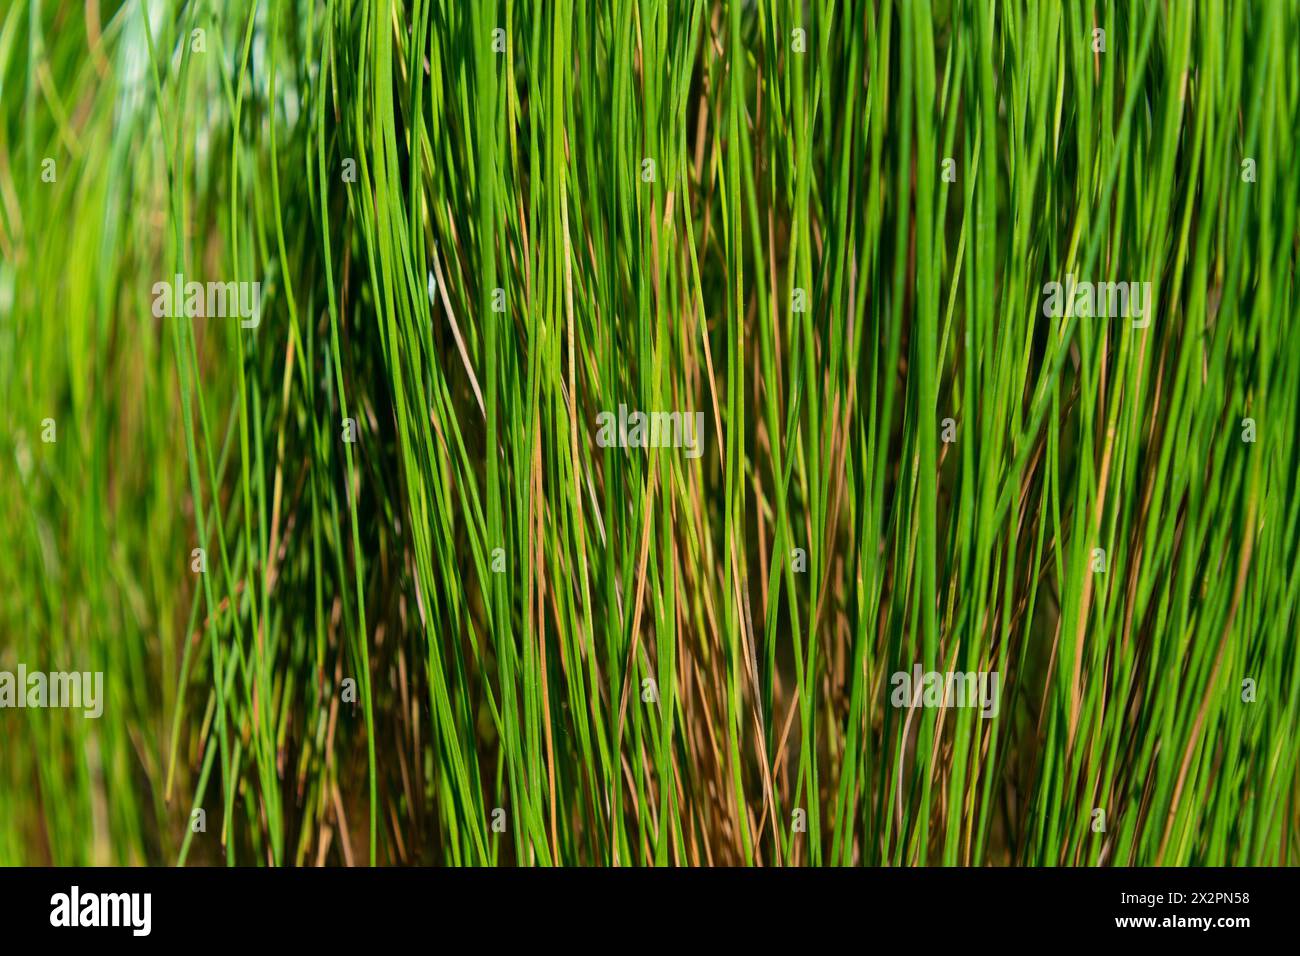 Green natural plant background. Branches of Pinus patula, close-up. patula pine, spreading-leaved pine, Mexican weeping pine Stock Photo